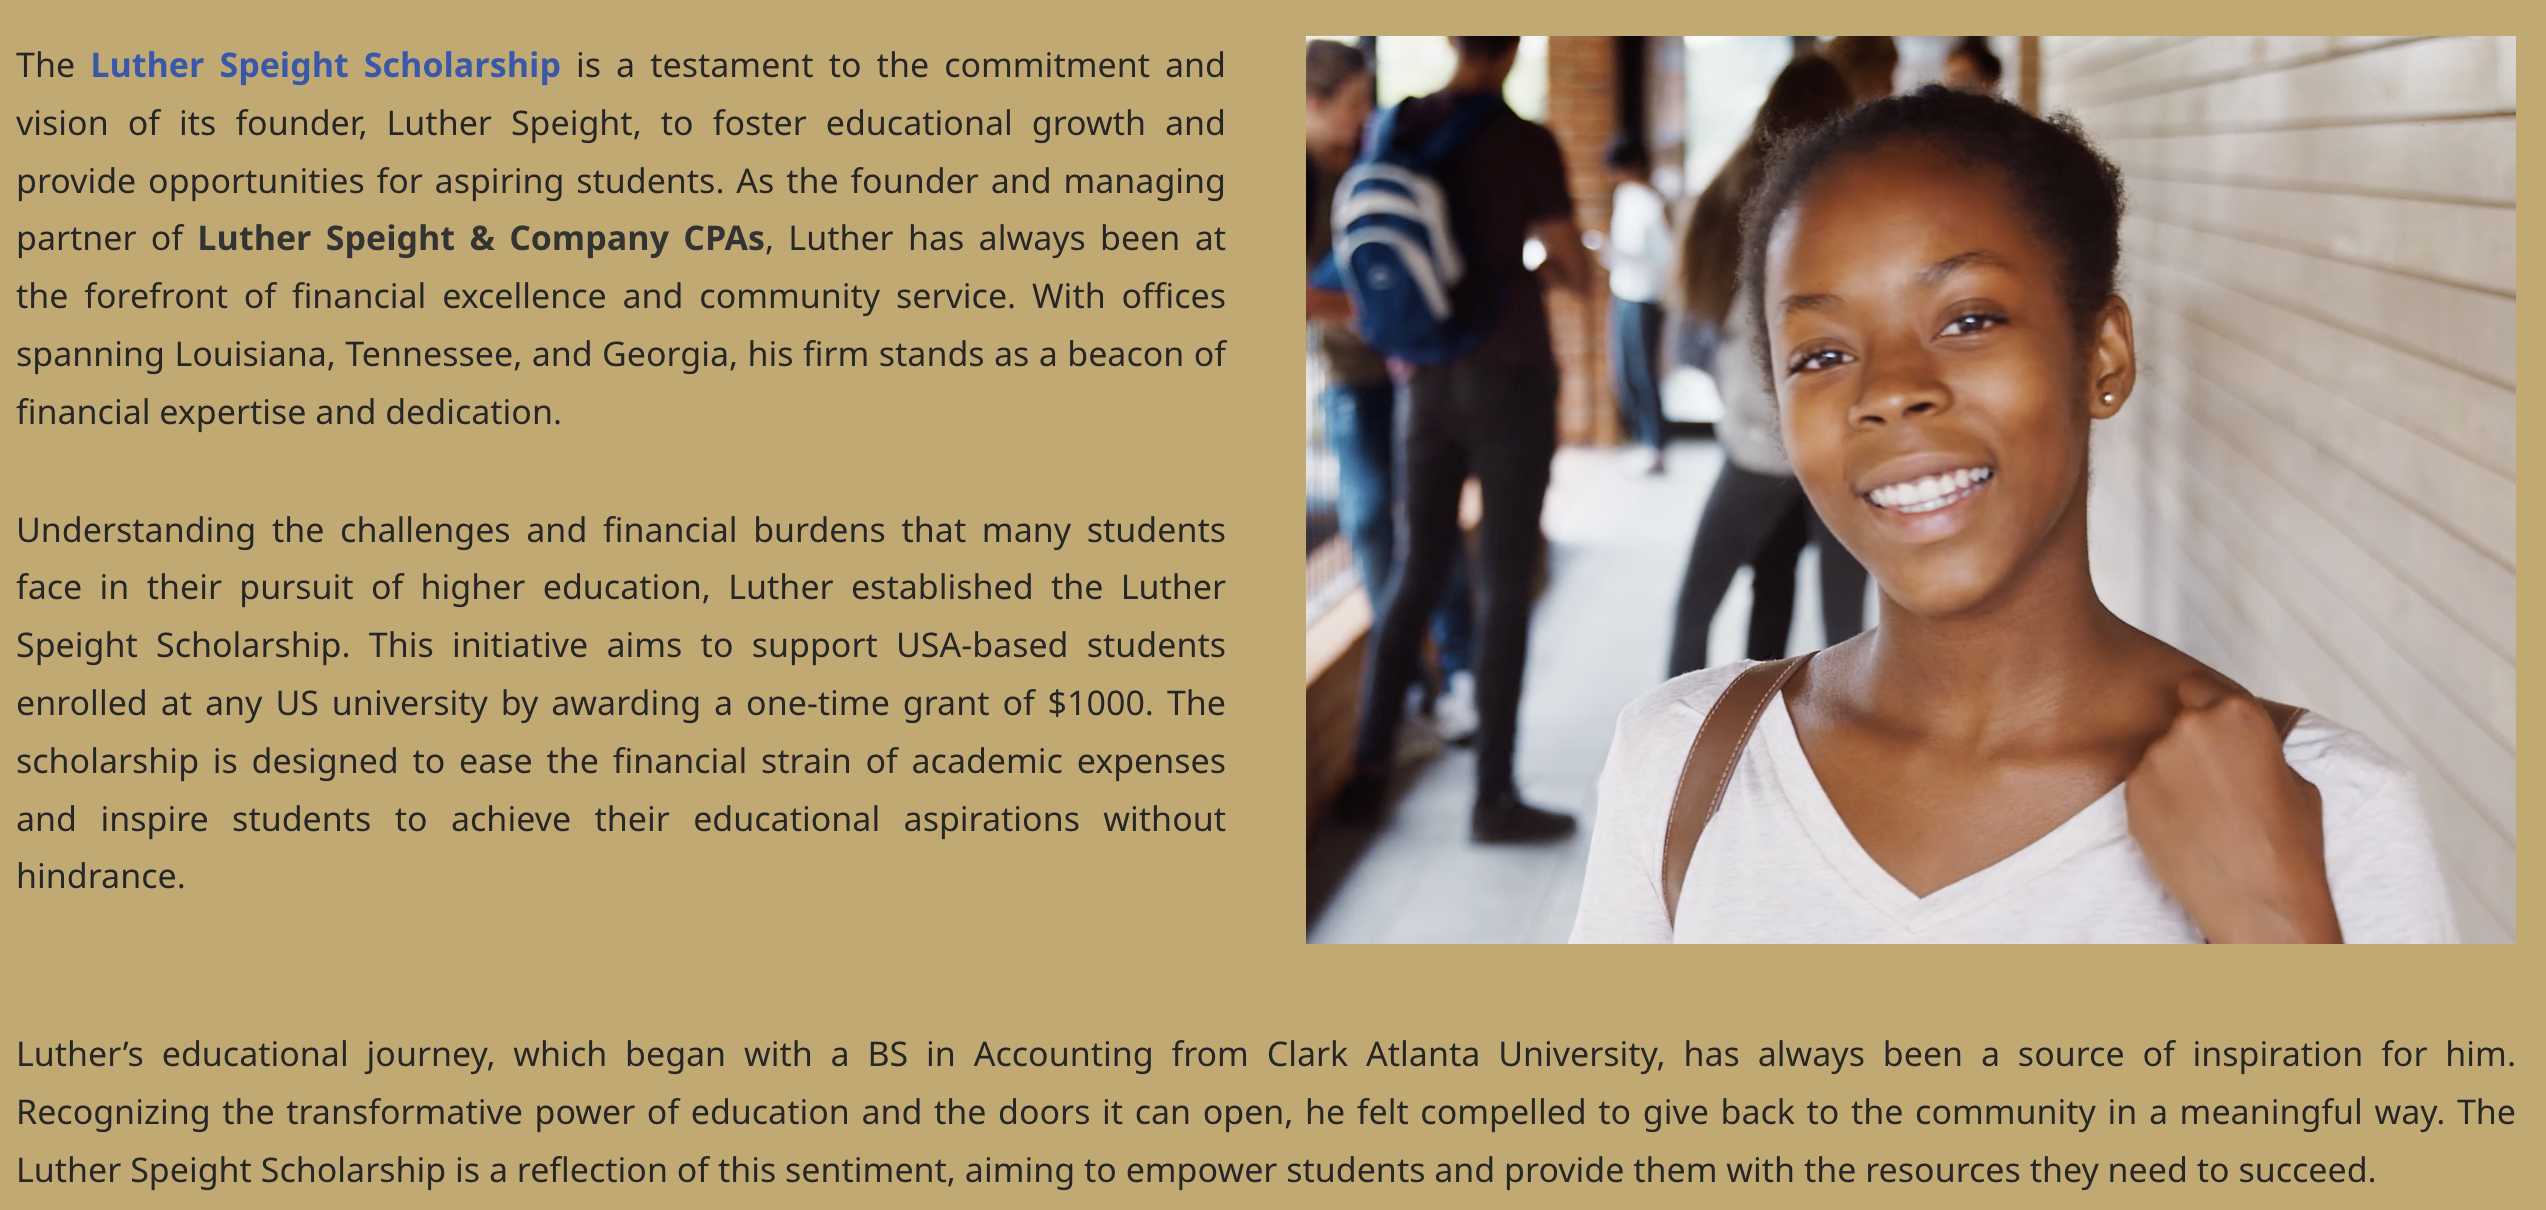 About Luther Speight Scholarship